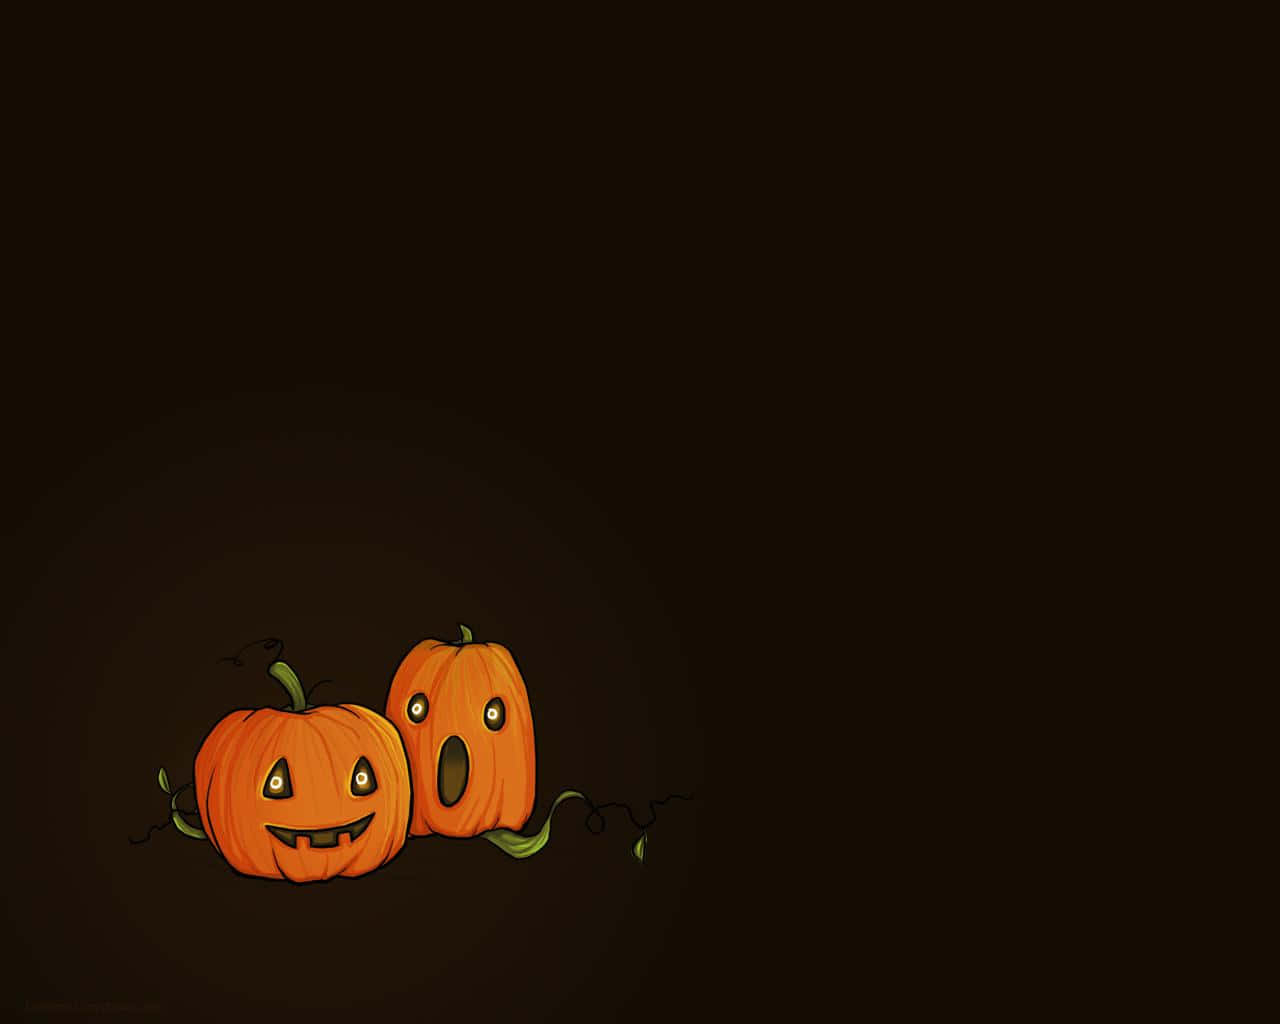 All Your Favorite Halloween Classic Packed Into One Minimal Halloween Wallpaper